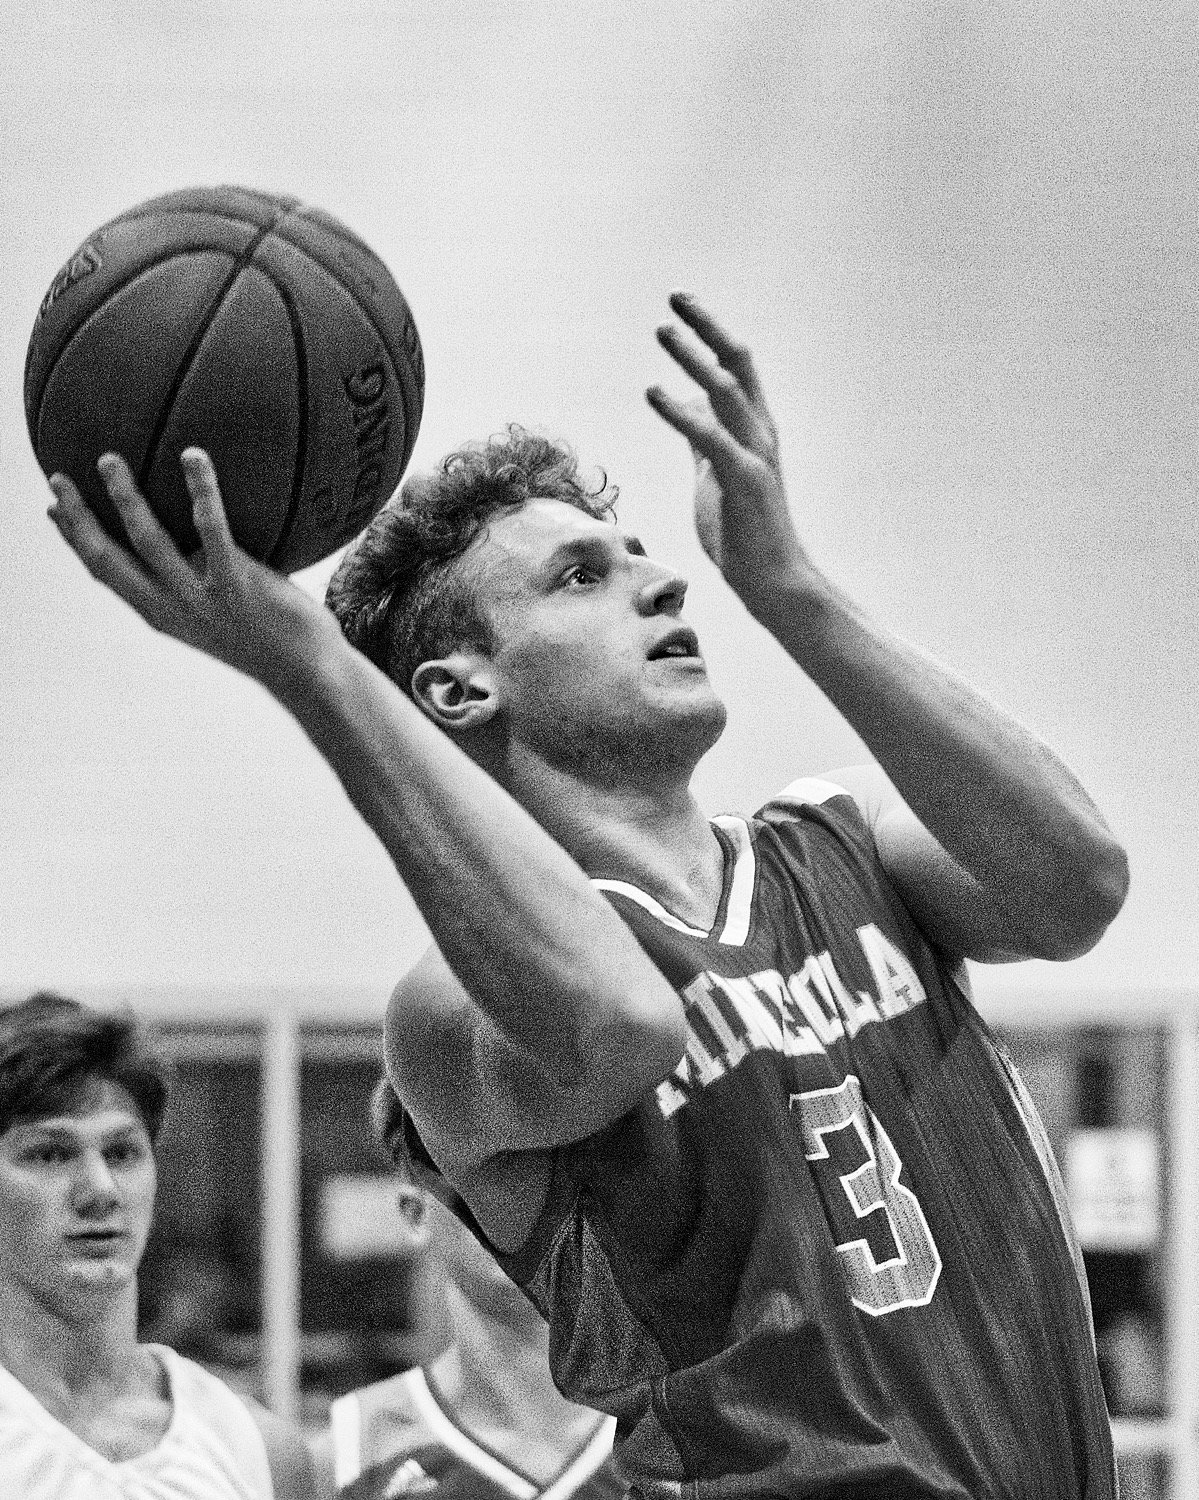 Senior point guard Jonah Fischer passed 1,000 points scored for his career at Mineola before leading the Yellowjackets three games deep into the playoffs. [see more sports from throughout the year]